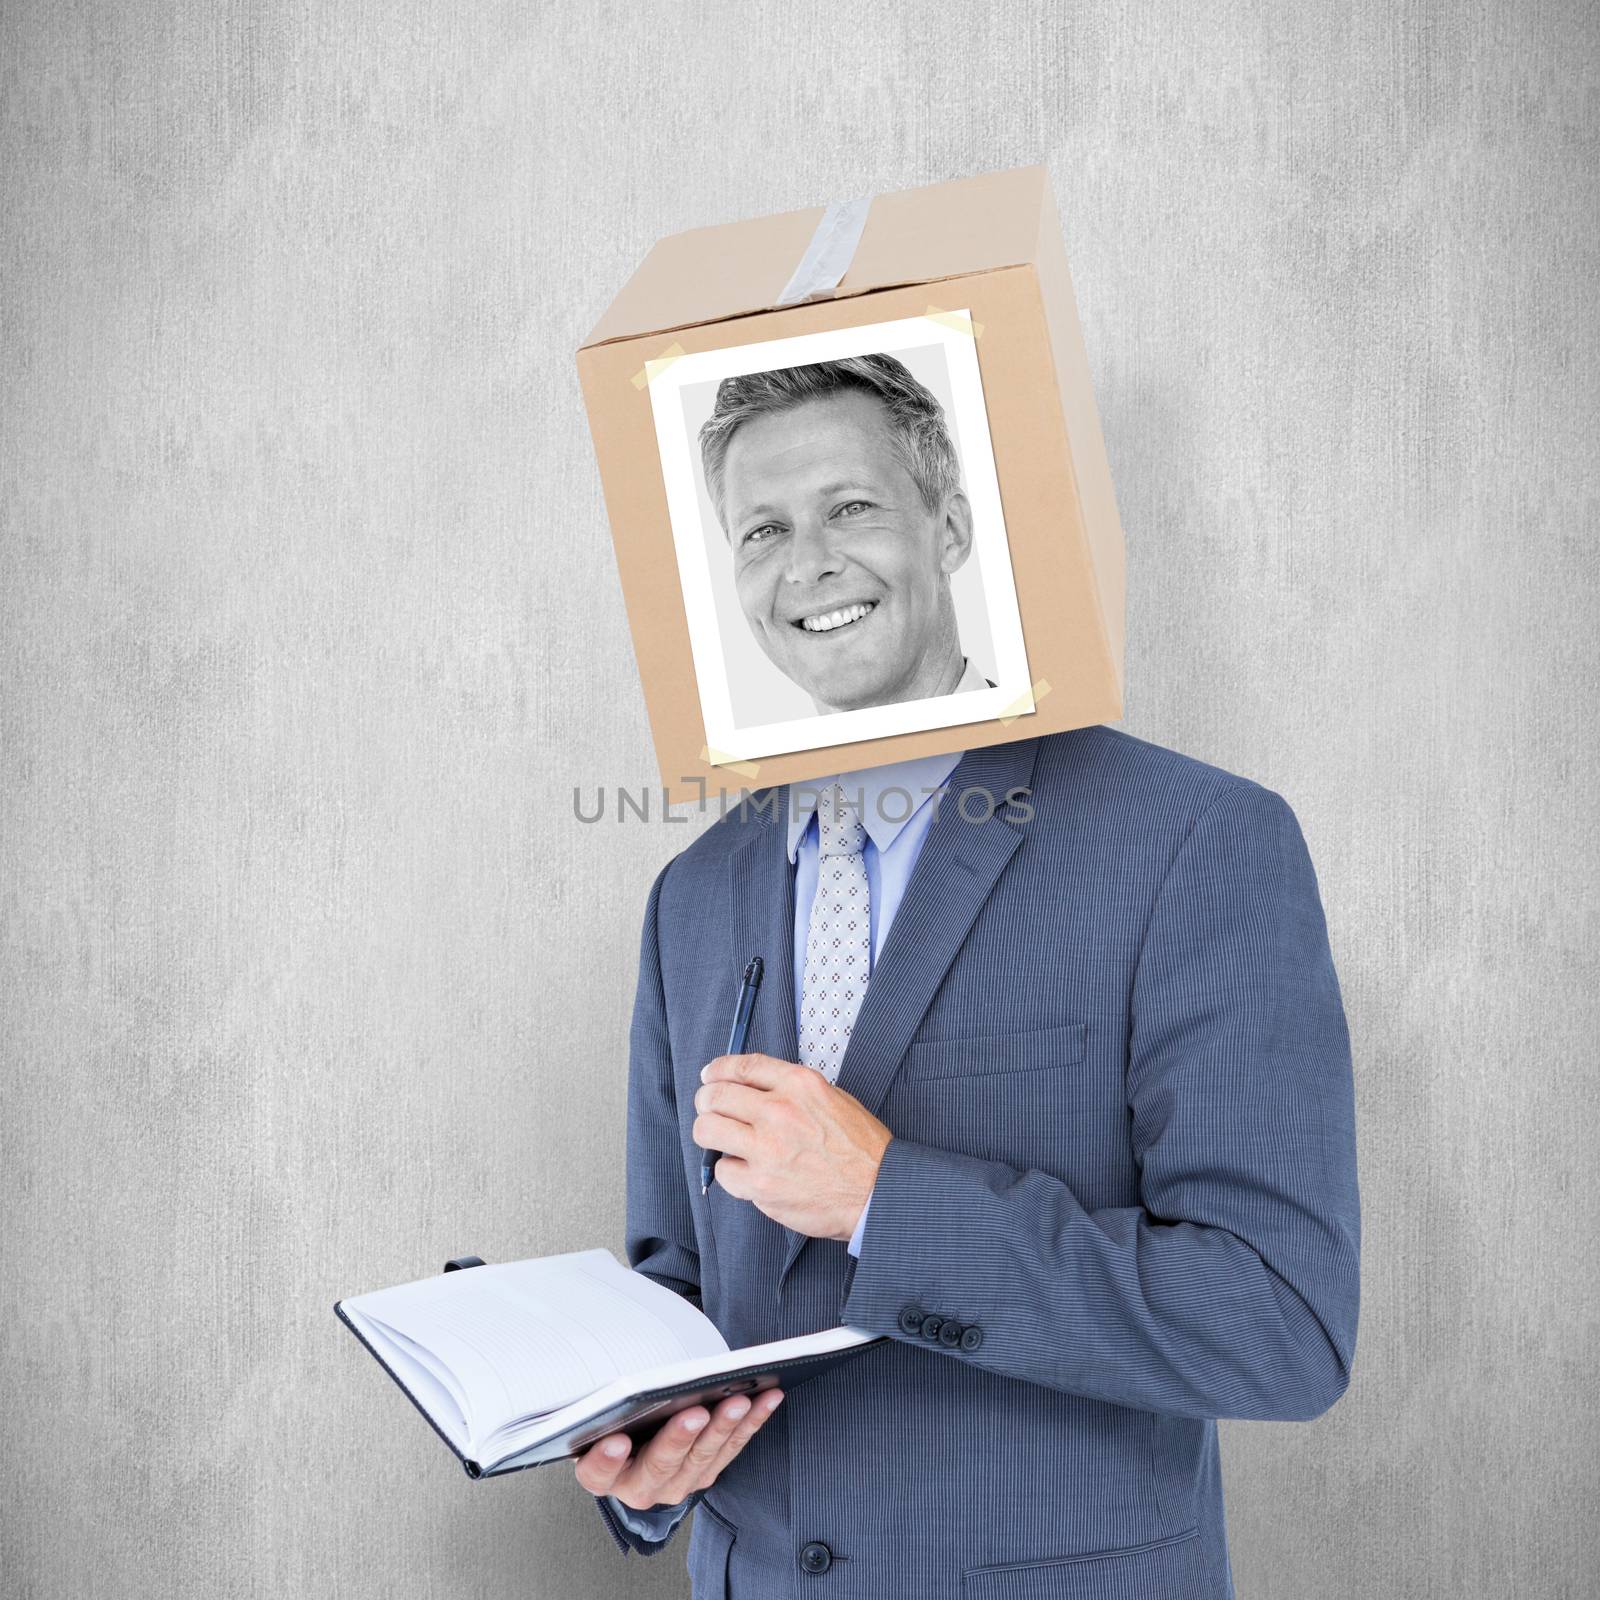 Businessman with photo box on head against white background